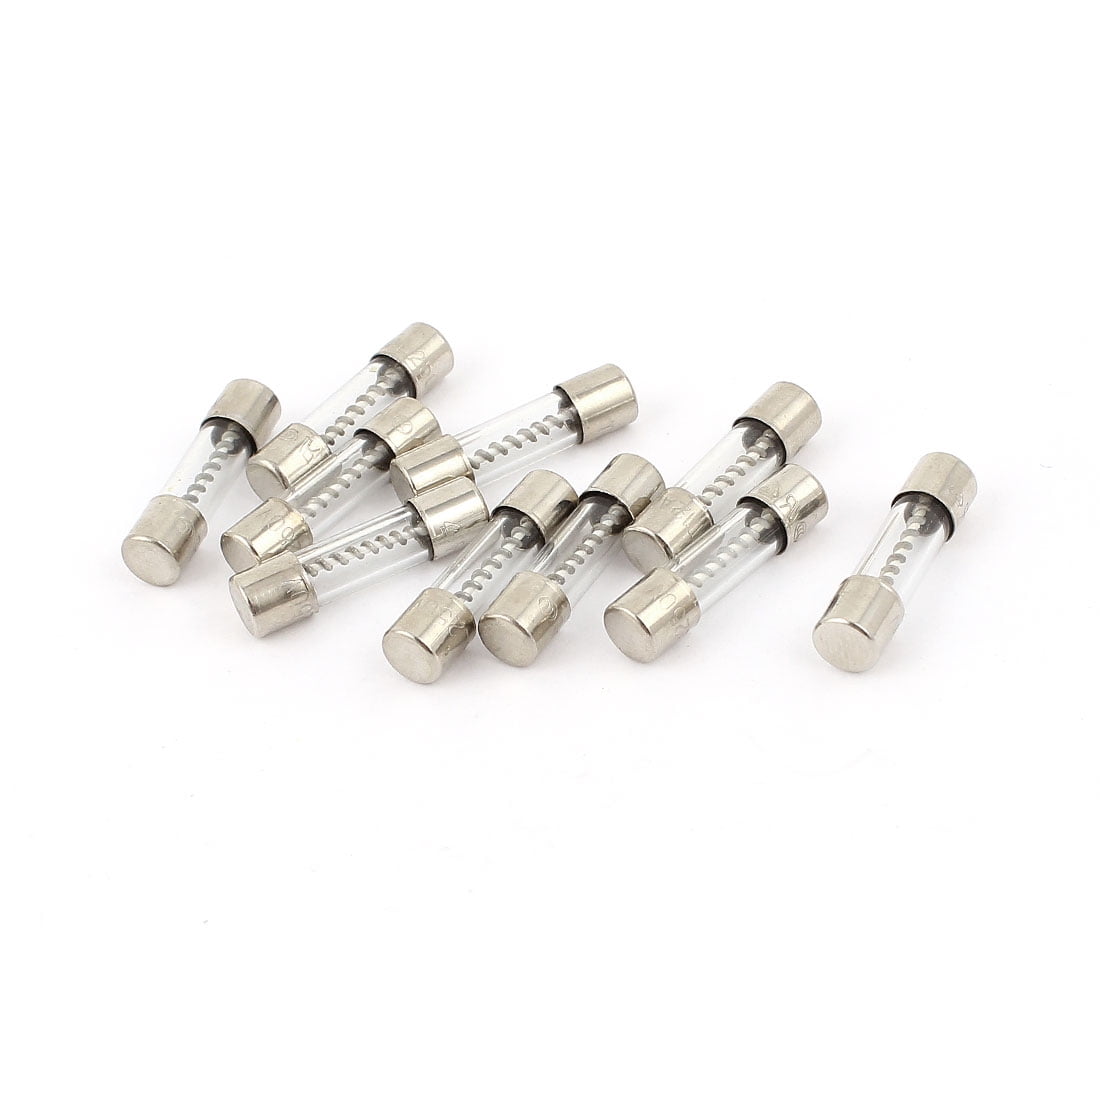 250V 12A 5mmx20mm Fast Blow Type Quick Glass Tube Fuses 100Pcs 